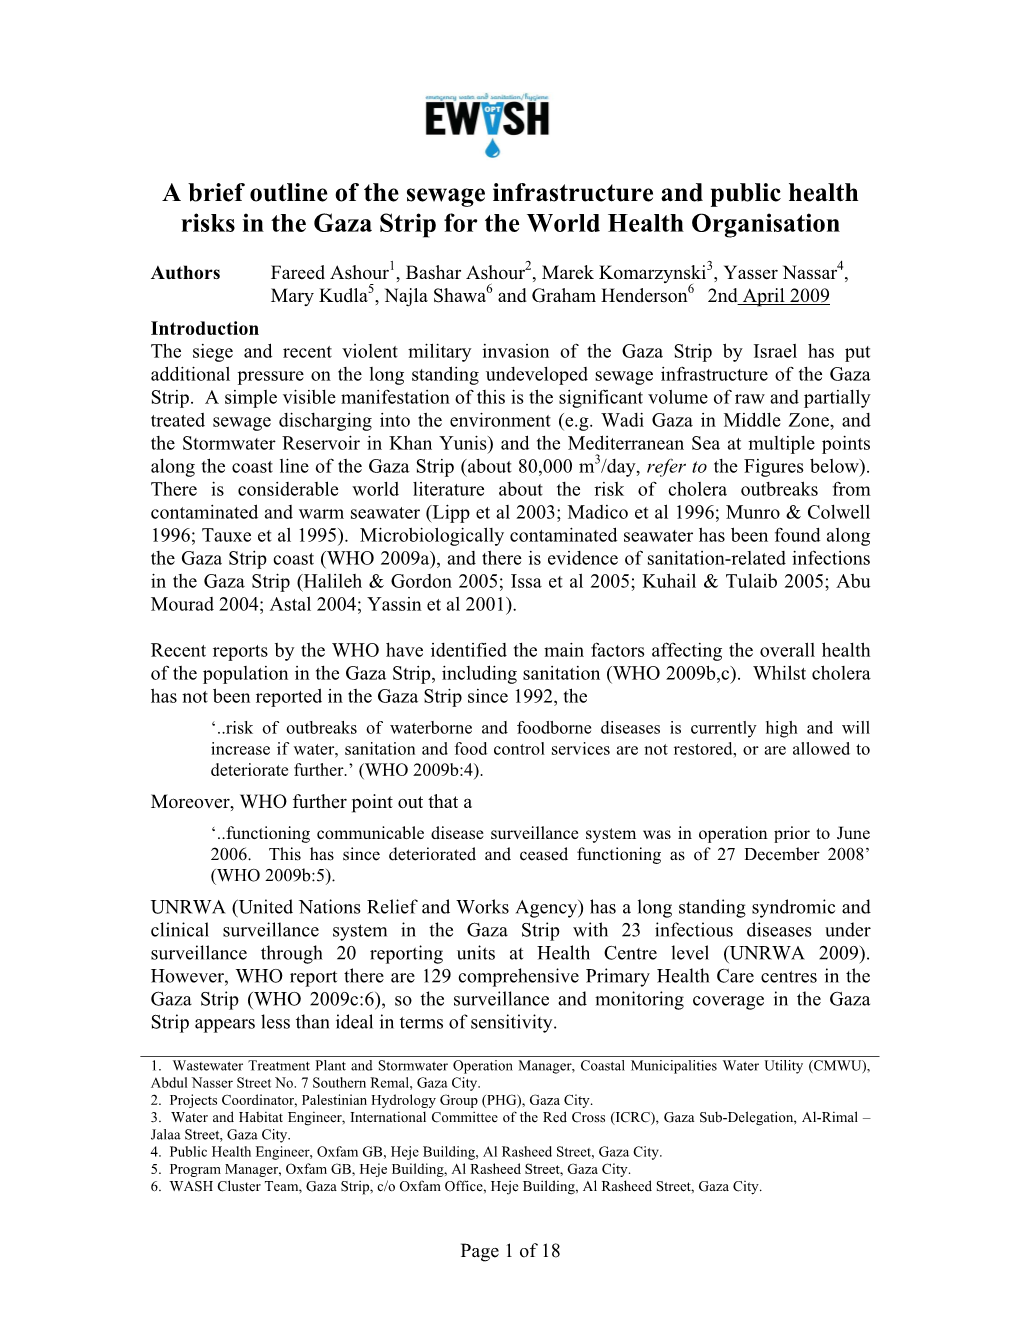 A Brief Outline of the Sewage Infrastructure and Public Health Risks in the Gaza Strip for the World Health Organisation